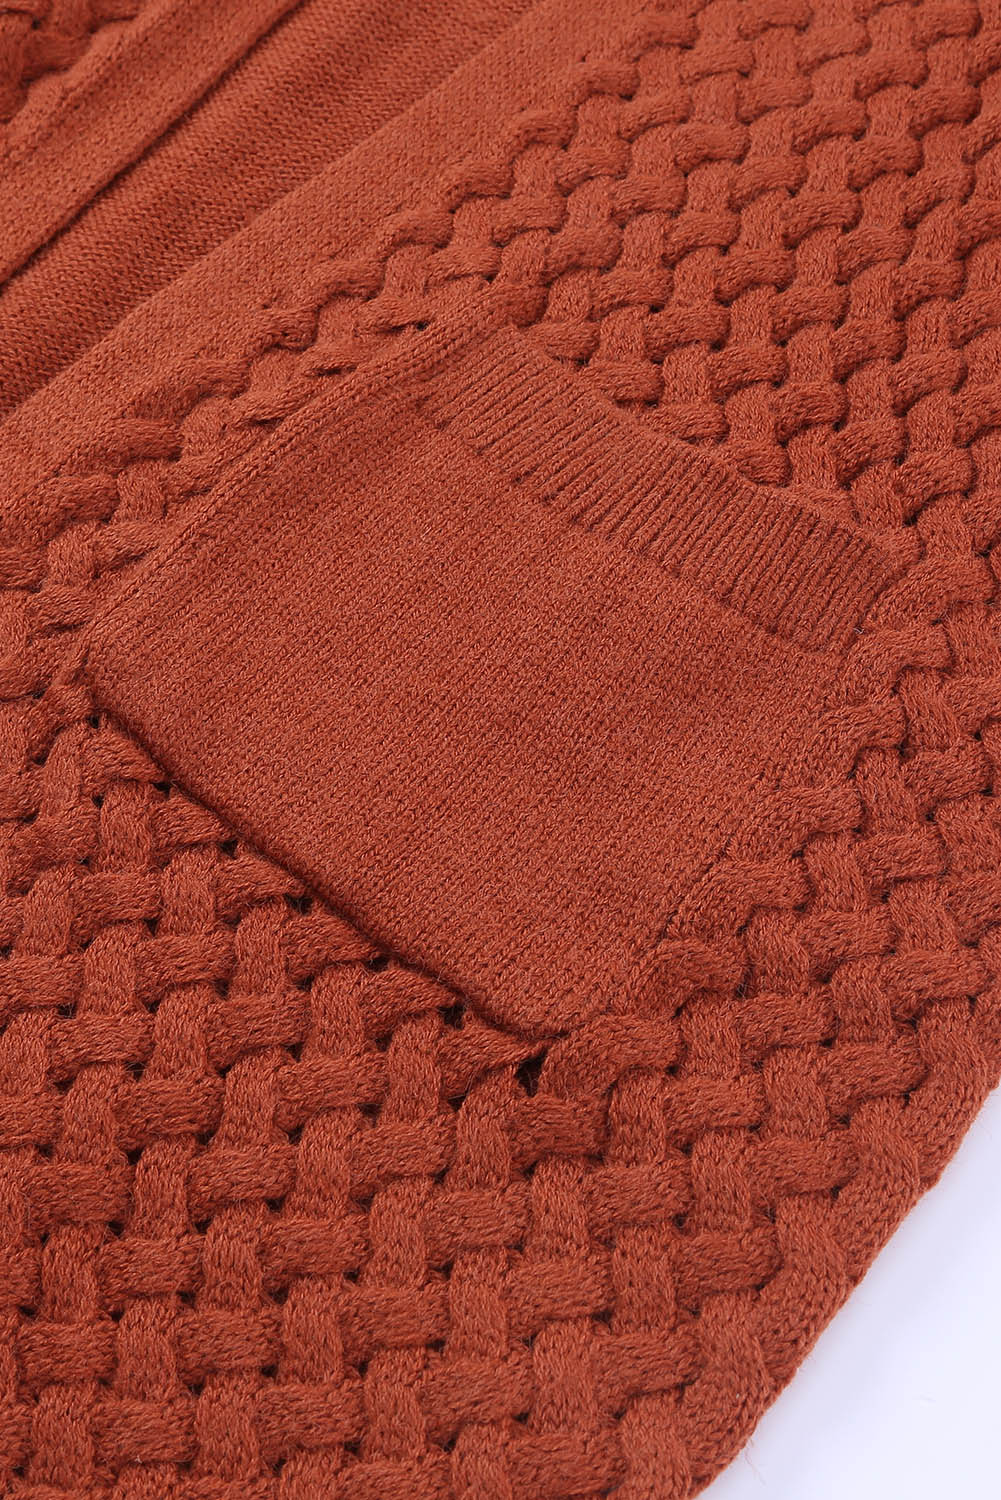 Brown Woven Texture Open Front Pockets Knit Cardigan